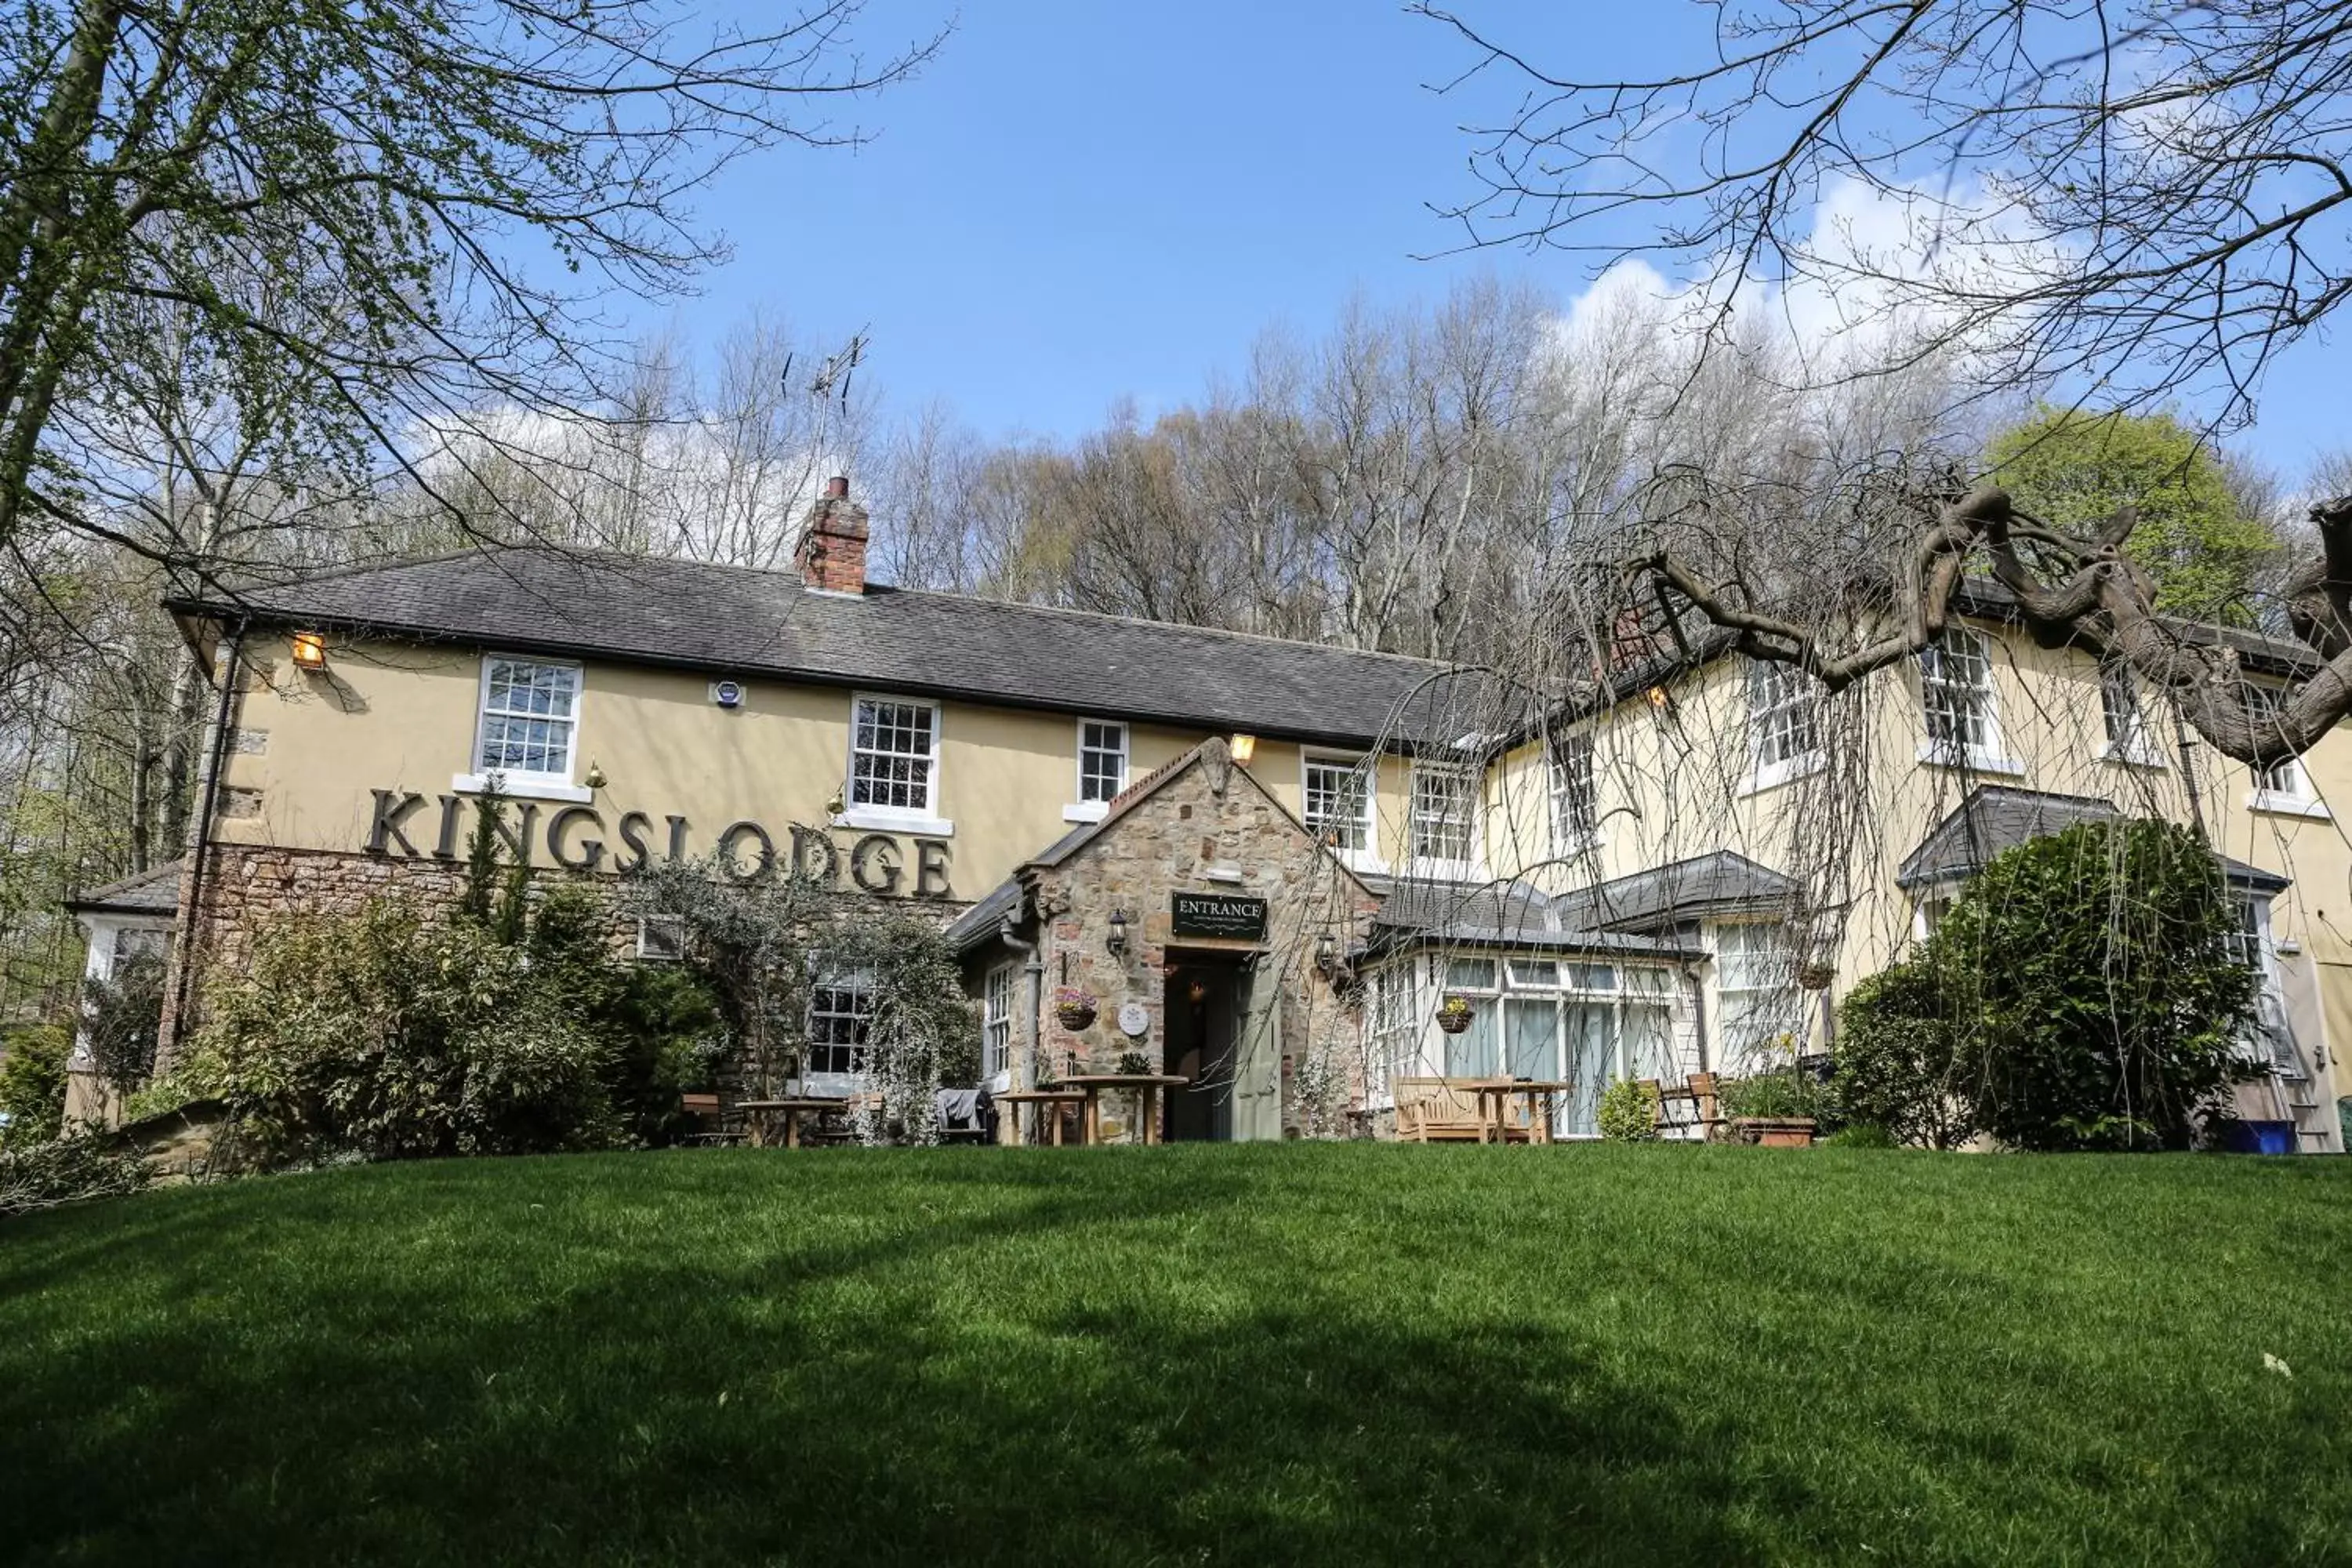 Property Building in The Kingslodge Inn - The Inn Collection Group